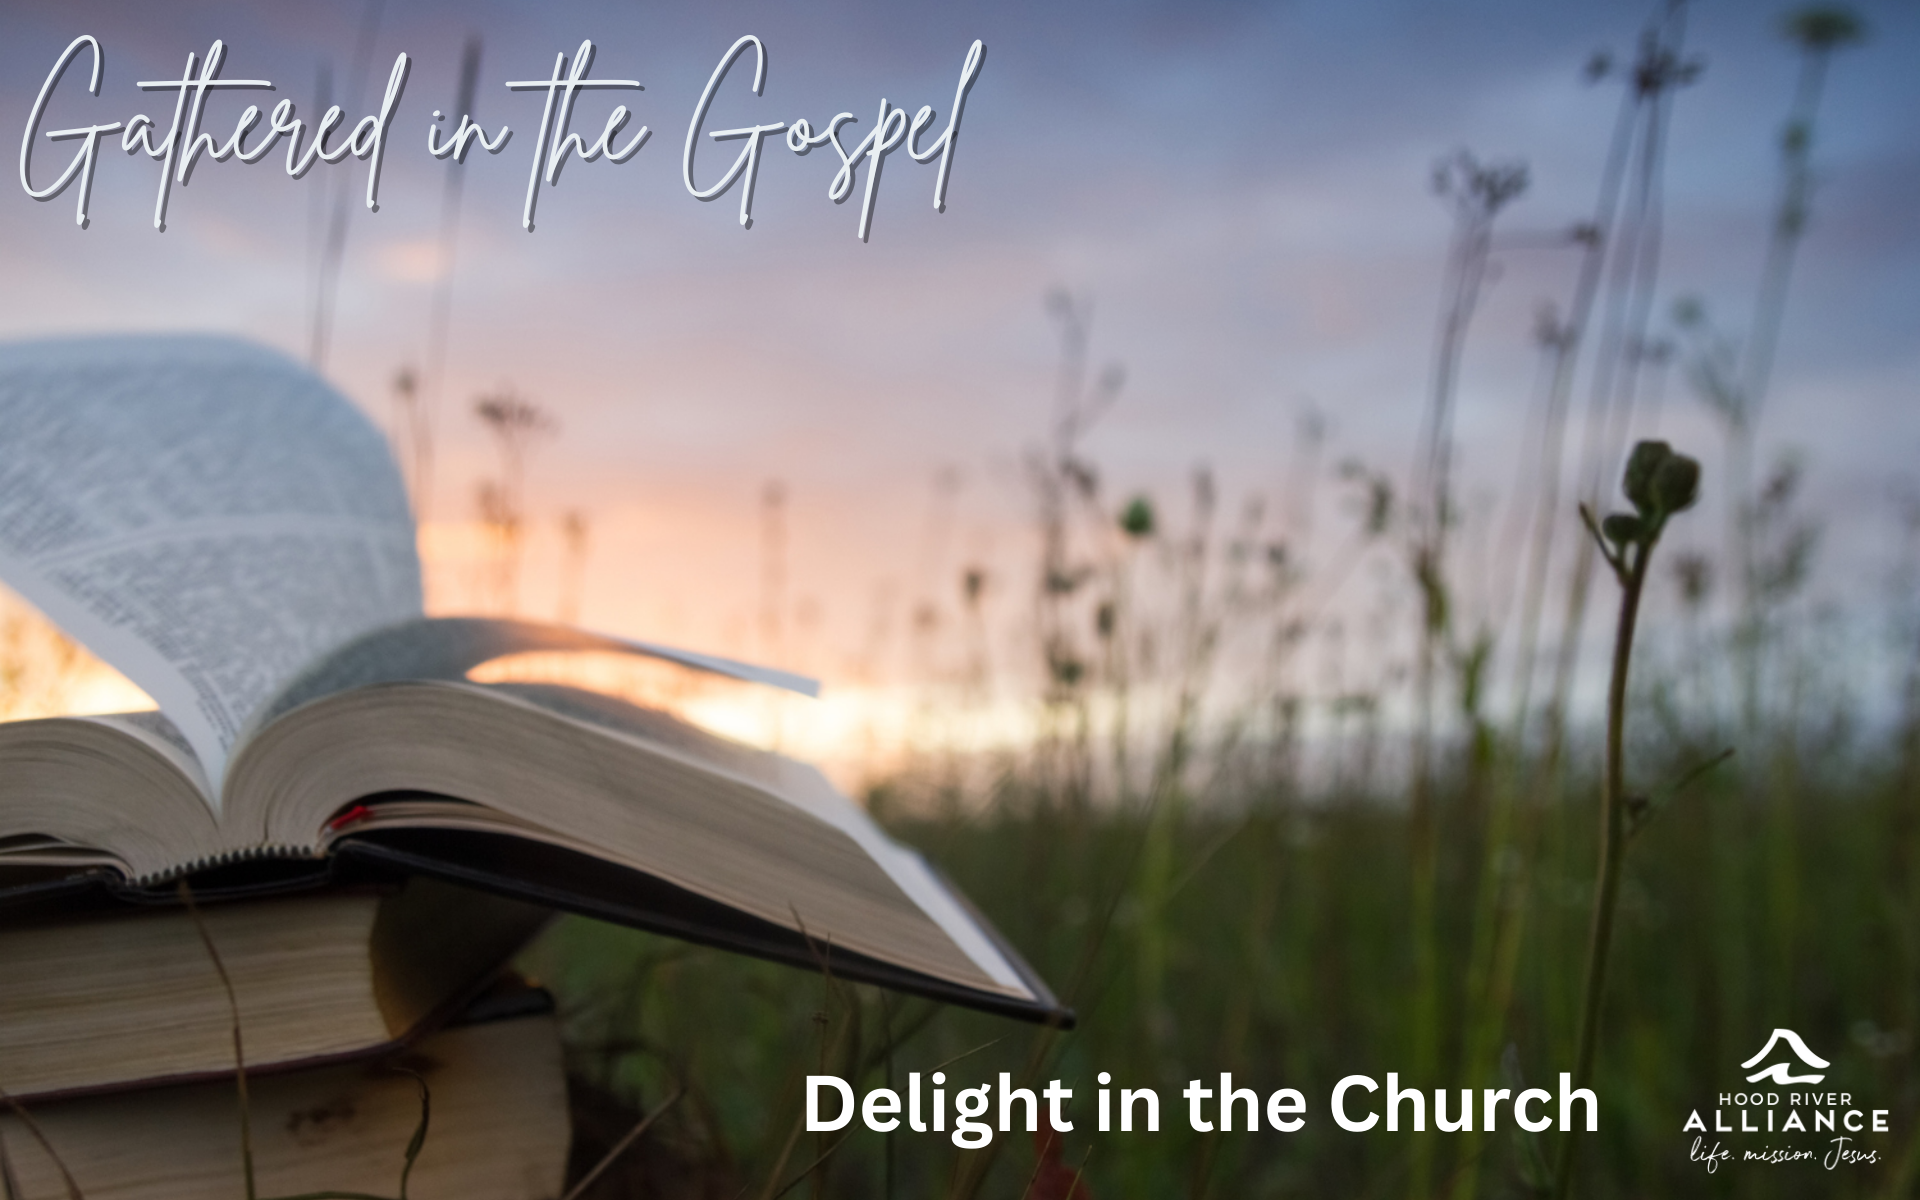 Gathered in the Gospel - Delight in the Church 